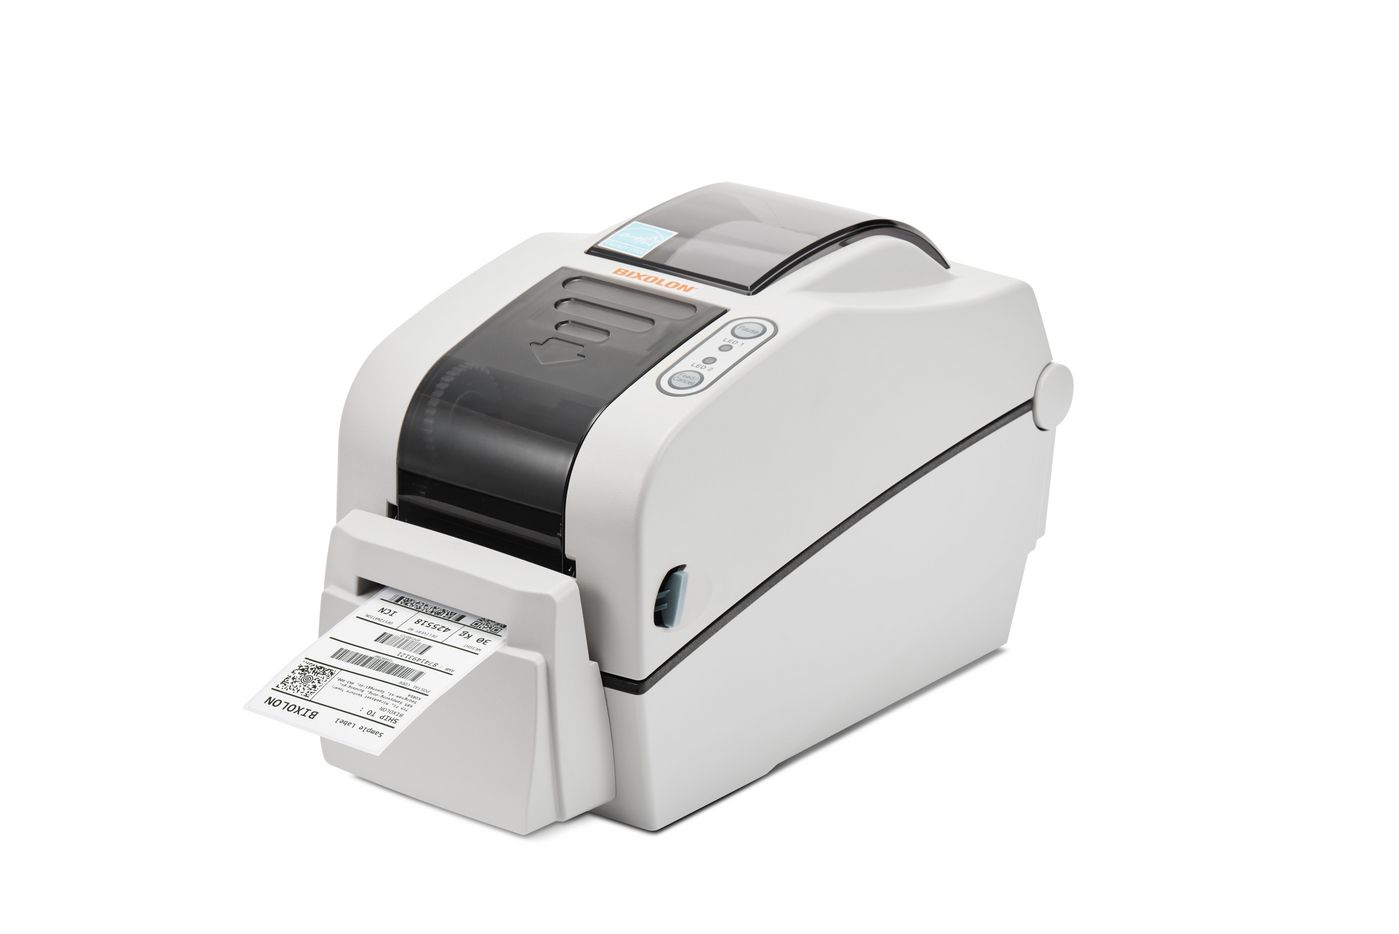 Slp-tx223ce - Label Printer - Direct Thermal - USB / Serial / Parallel - Ivory